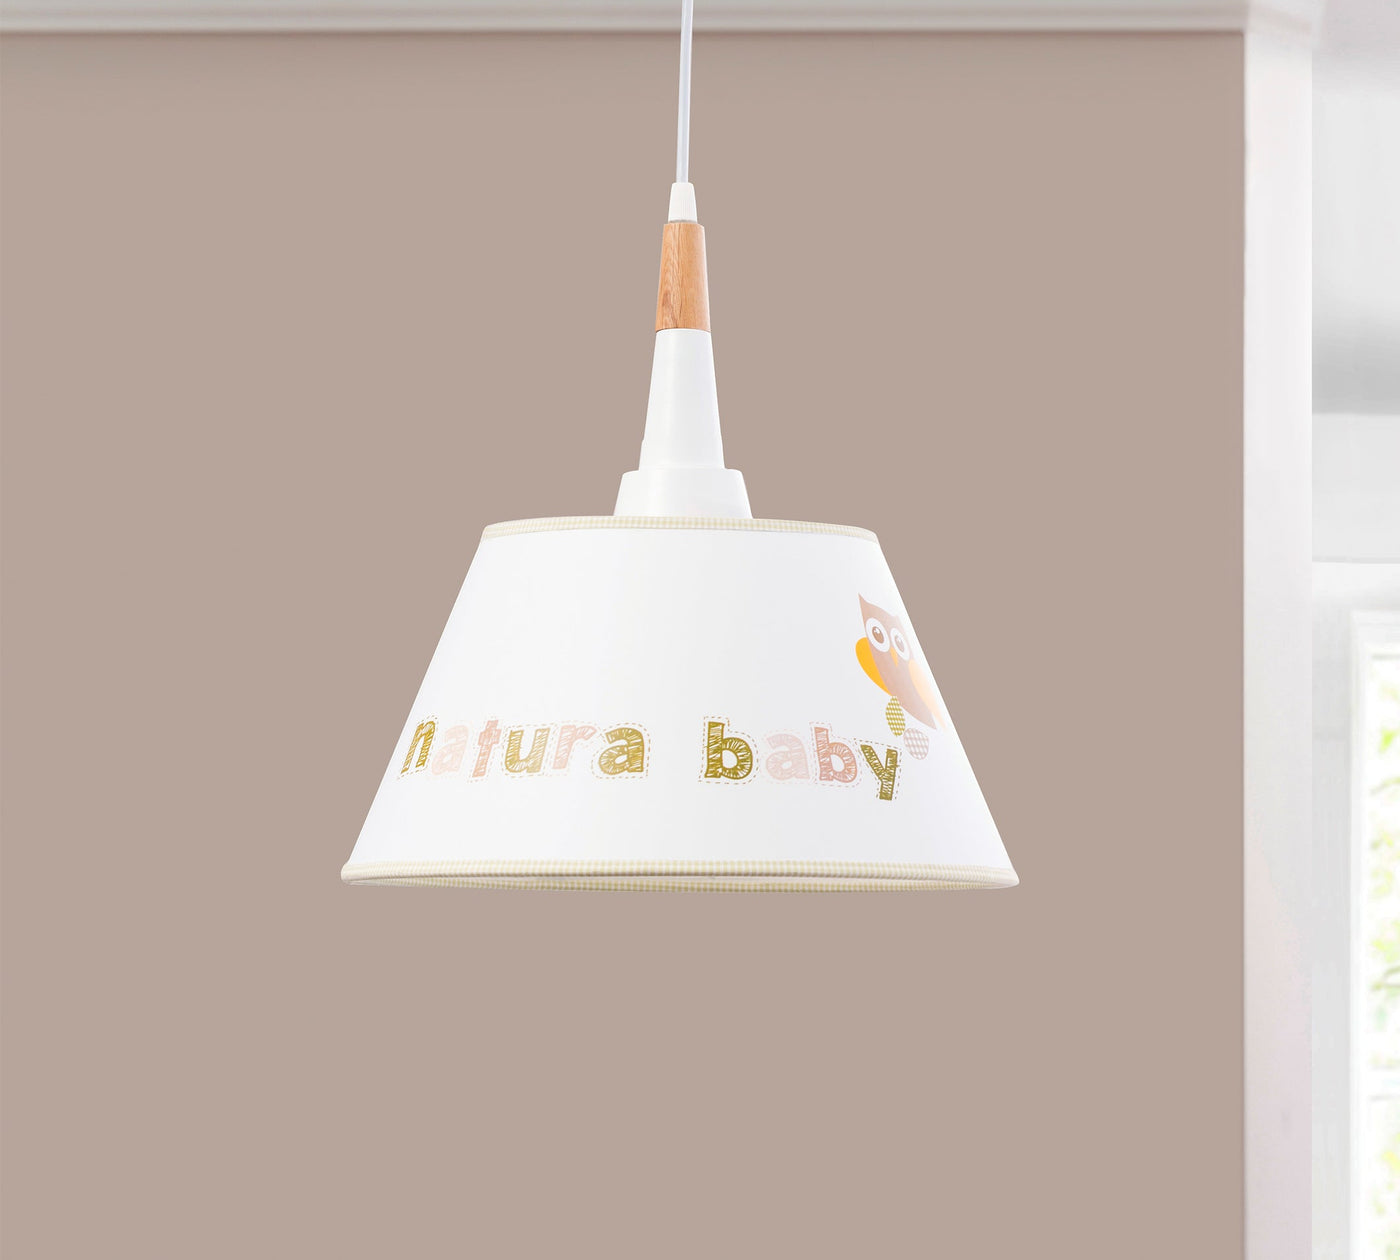 Natura Baby Ceiling Lamp - ON ORDER ONLY